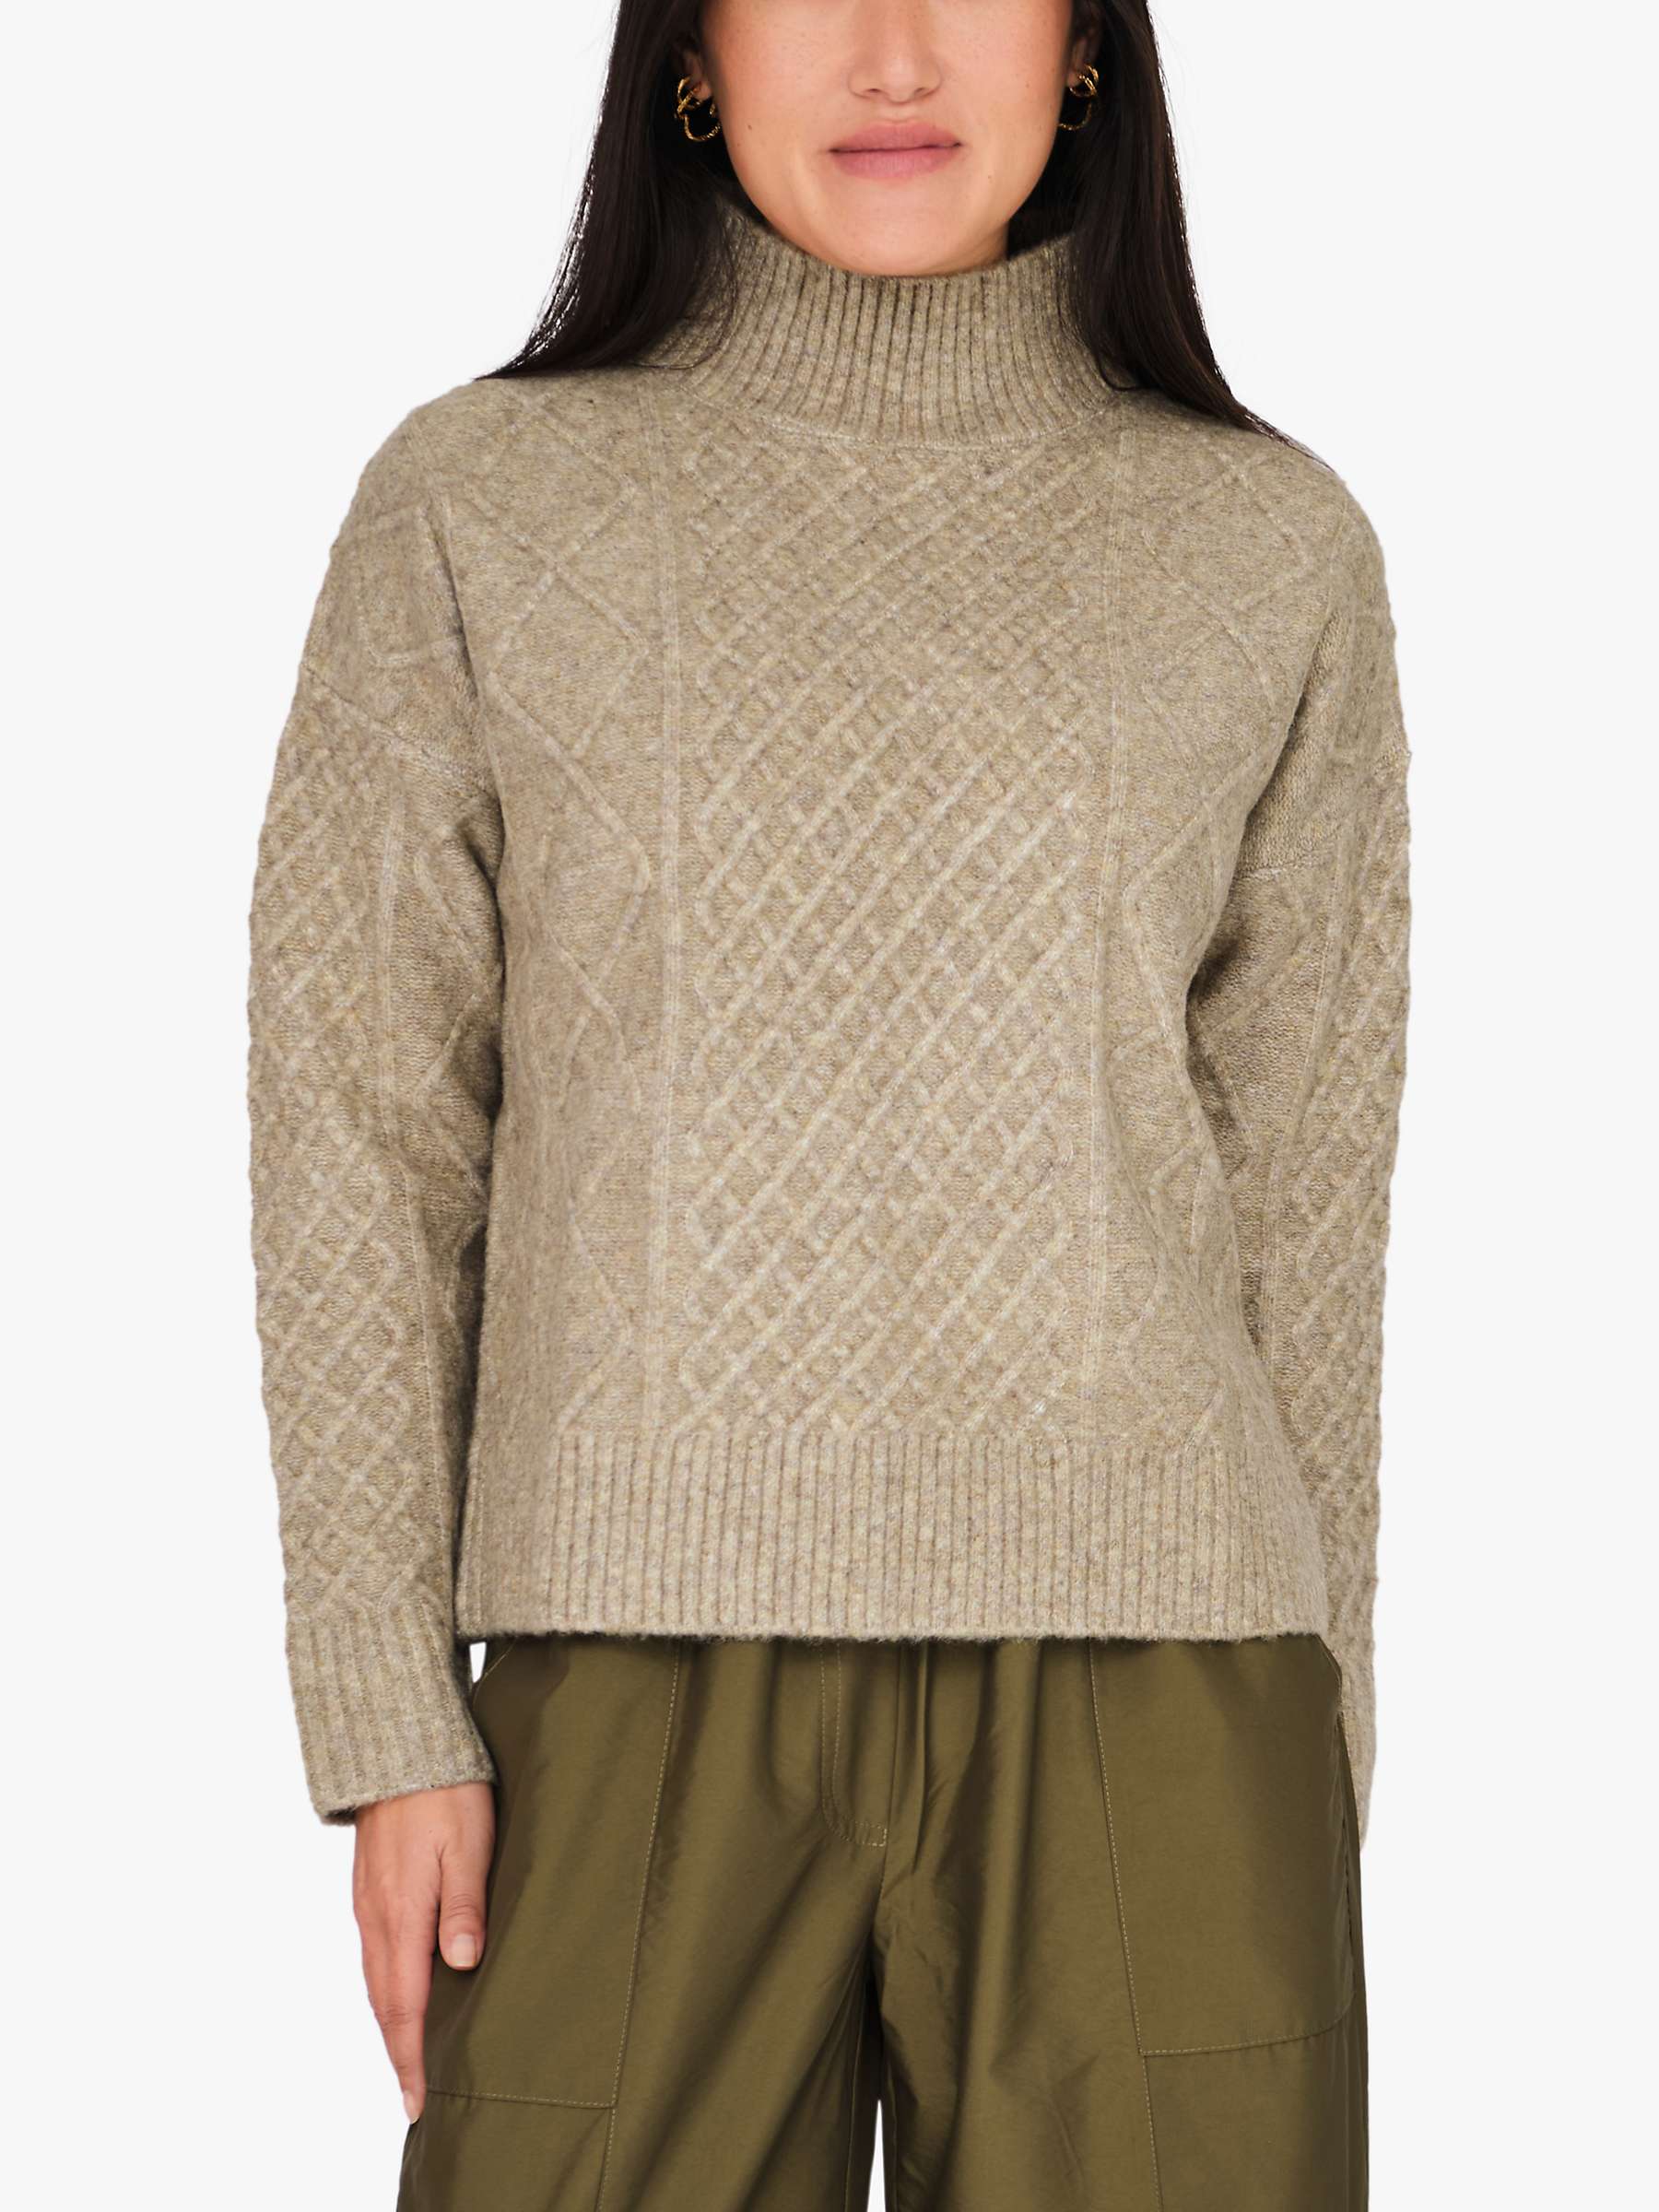 Buy A-VIEW Uvenas Knitted High Neck Jumper Online at johnlewis.com